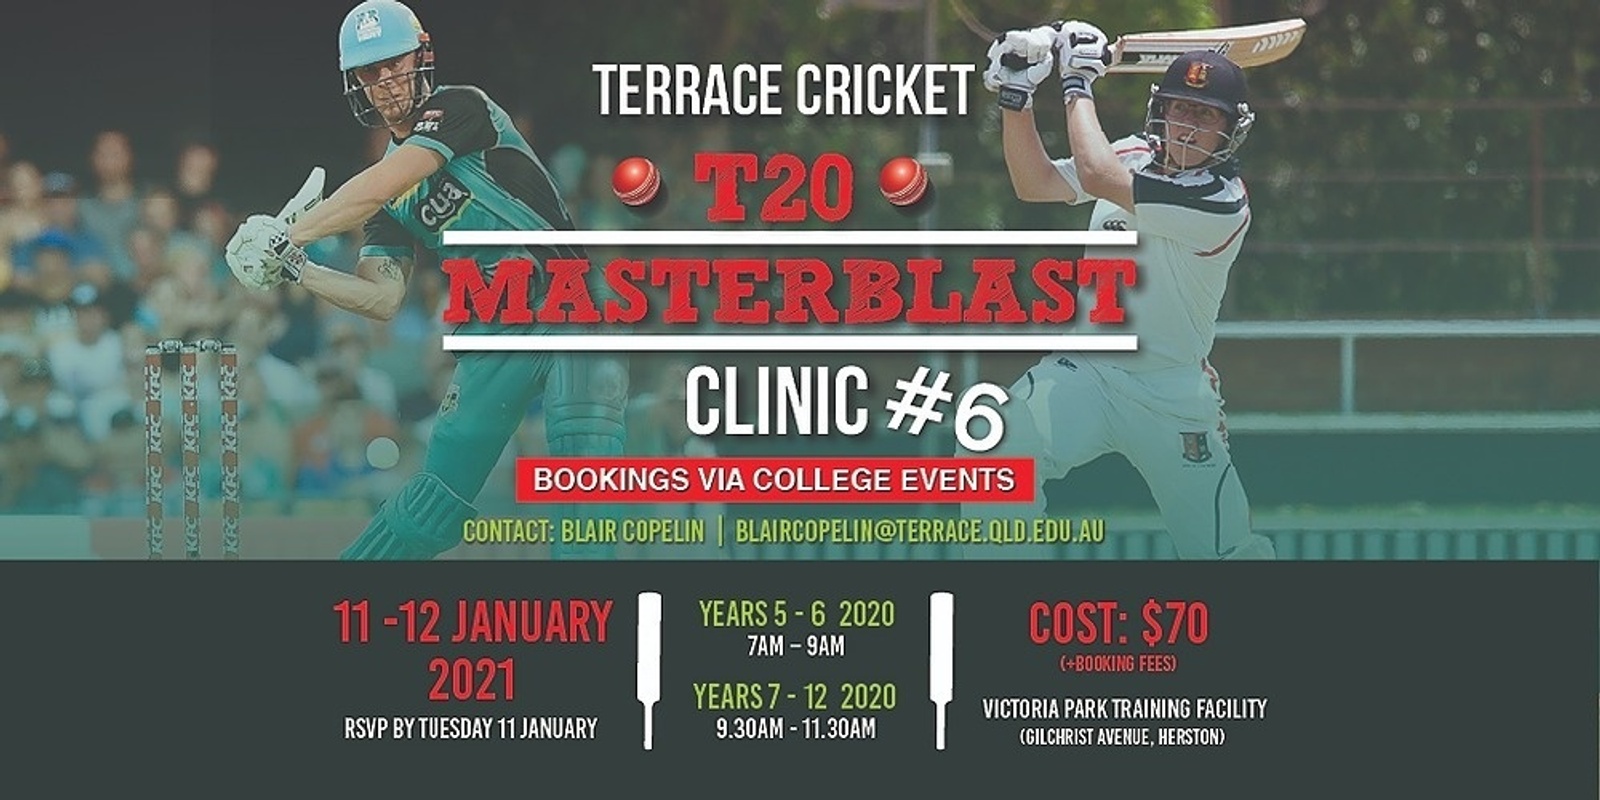 Banner image for Terrace Cricket T20 Masterblast Clinic #6